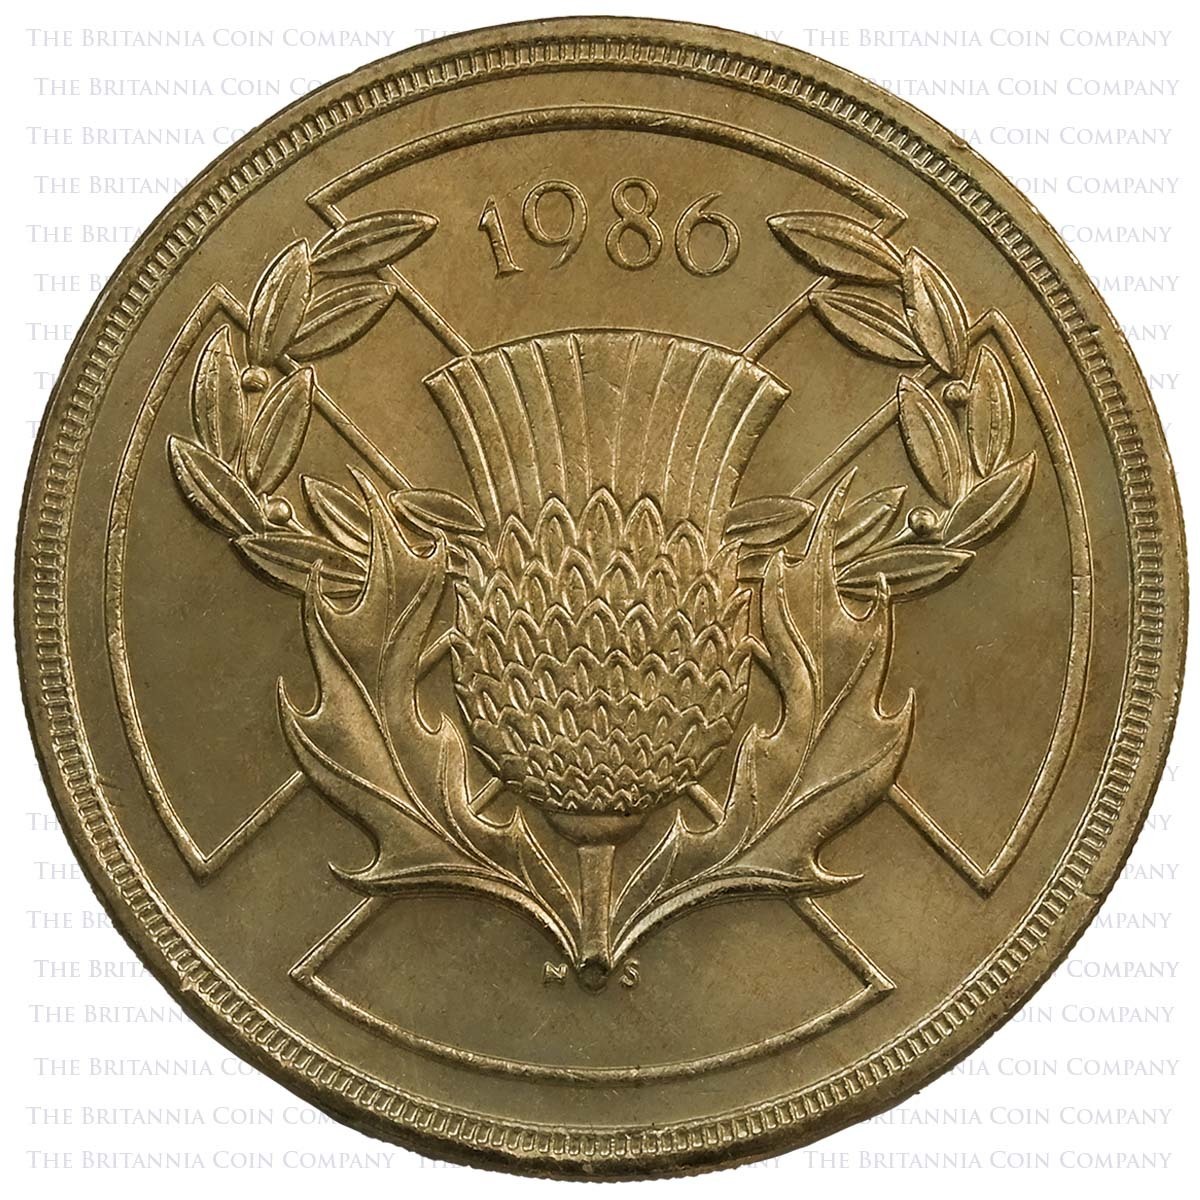 This 1986 coin was the first commemorative Two Pound issued by The Royal Mint.  The design celebrates the 13th Commonwealth Games which took place in Edinburgh, Scotland. The work of Norman Sillman, this coin features a Scottish thistle and a wreath of la